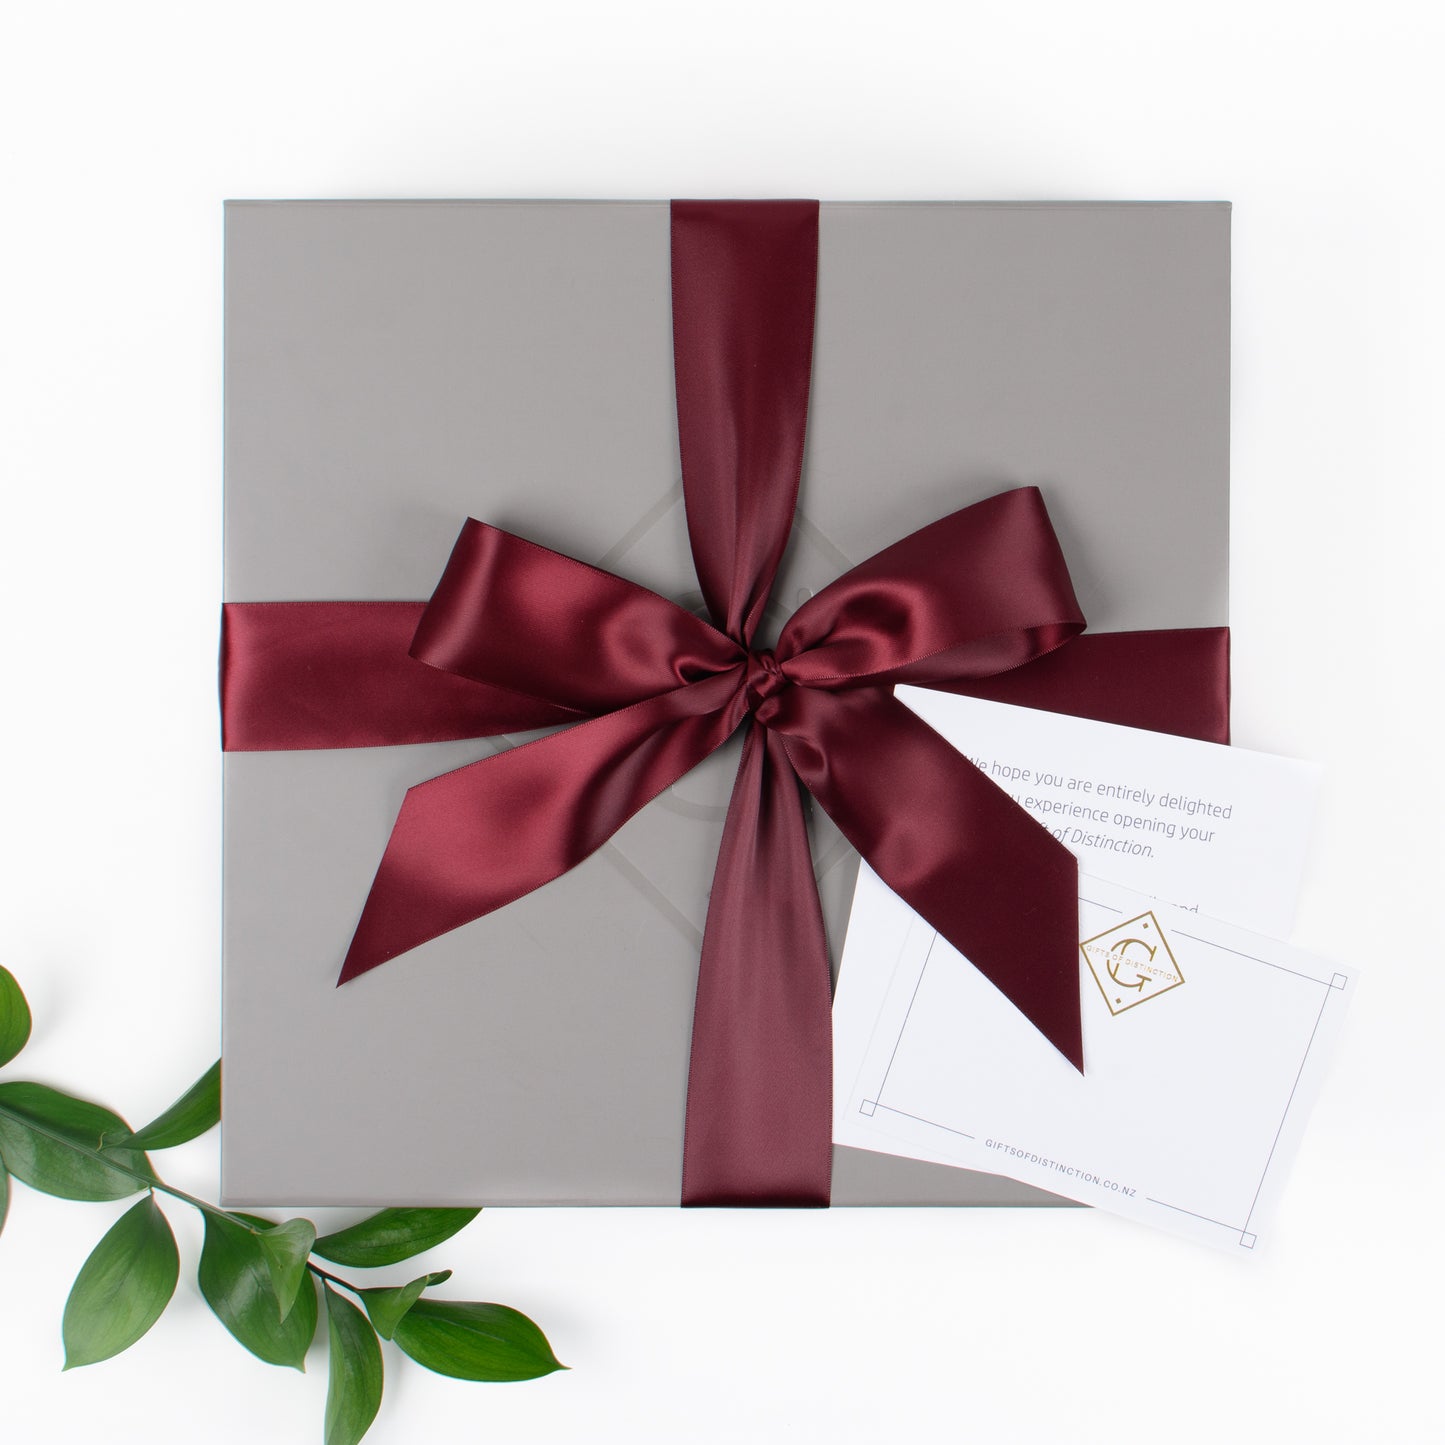 Re-Luxe (Limited Edition) - Gift Boxes NZ - Gifts of Distinction